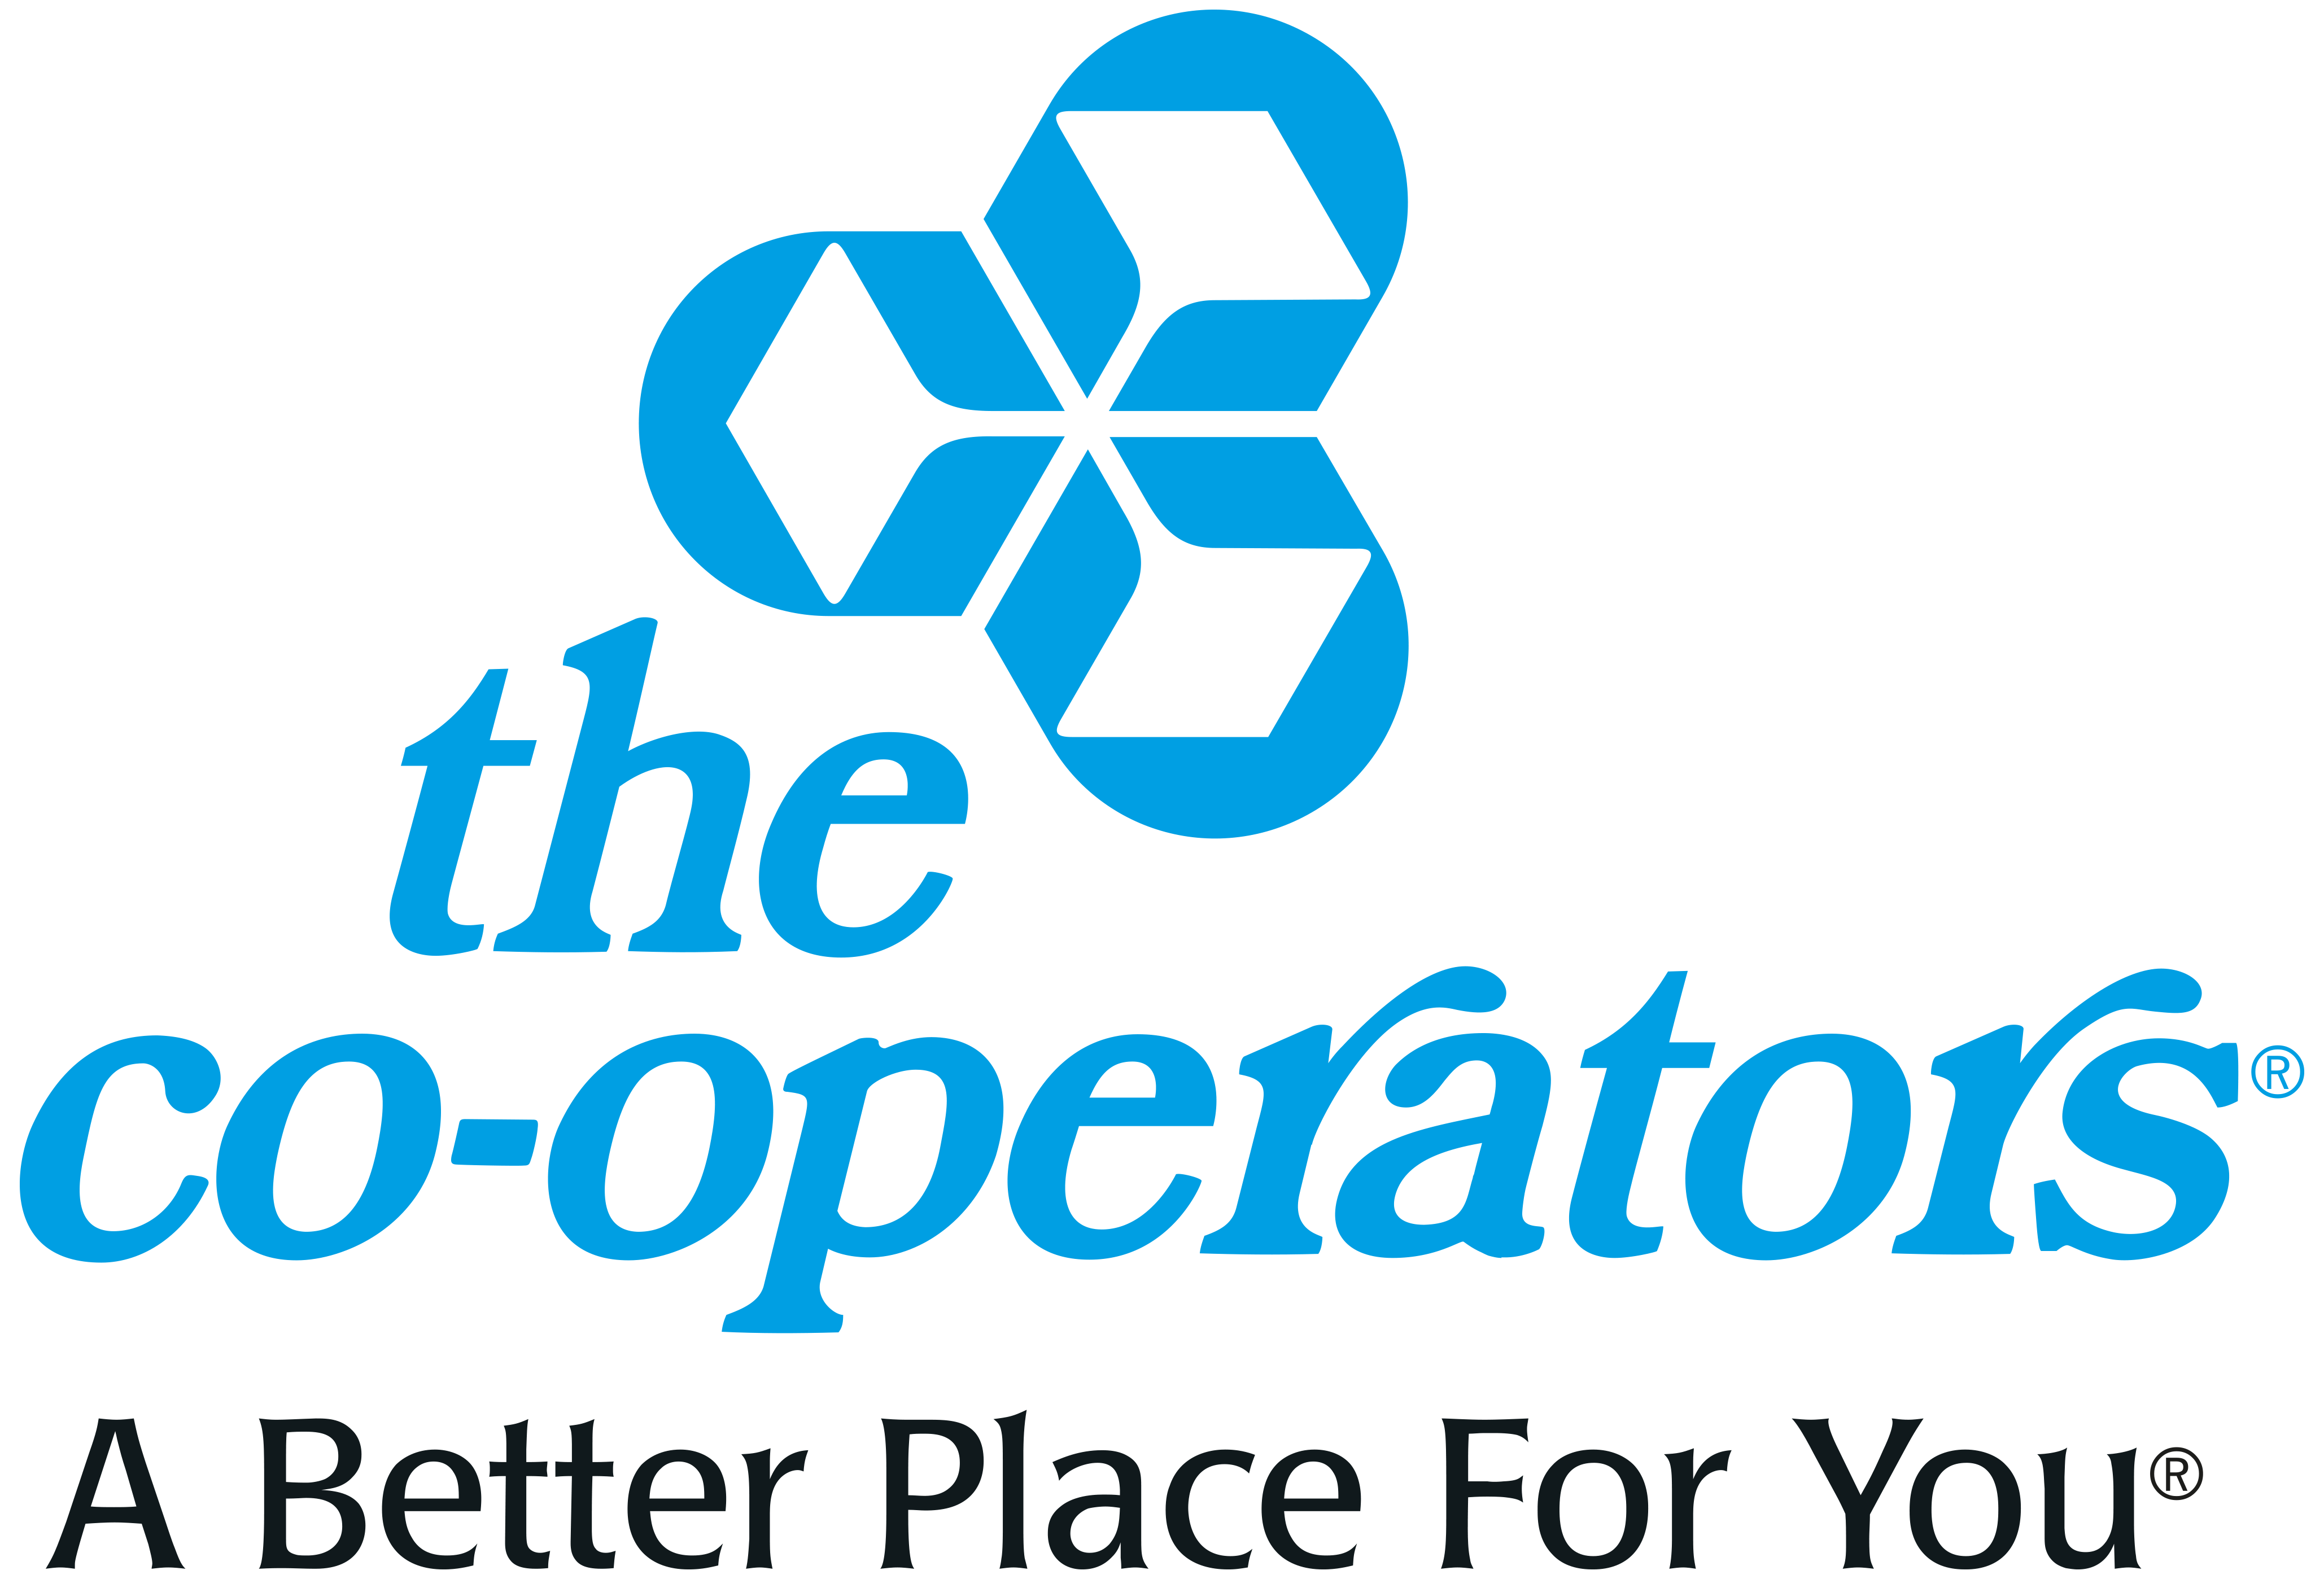 The Co-operators provides COVID-19 relief funding to Canadian co-operatives